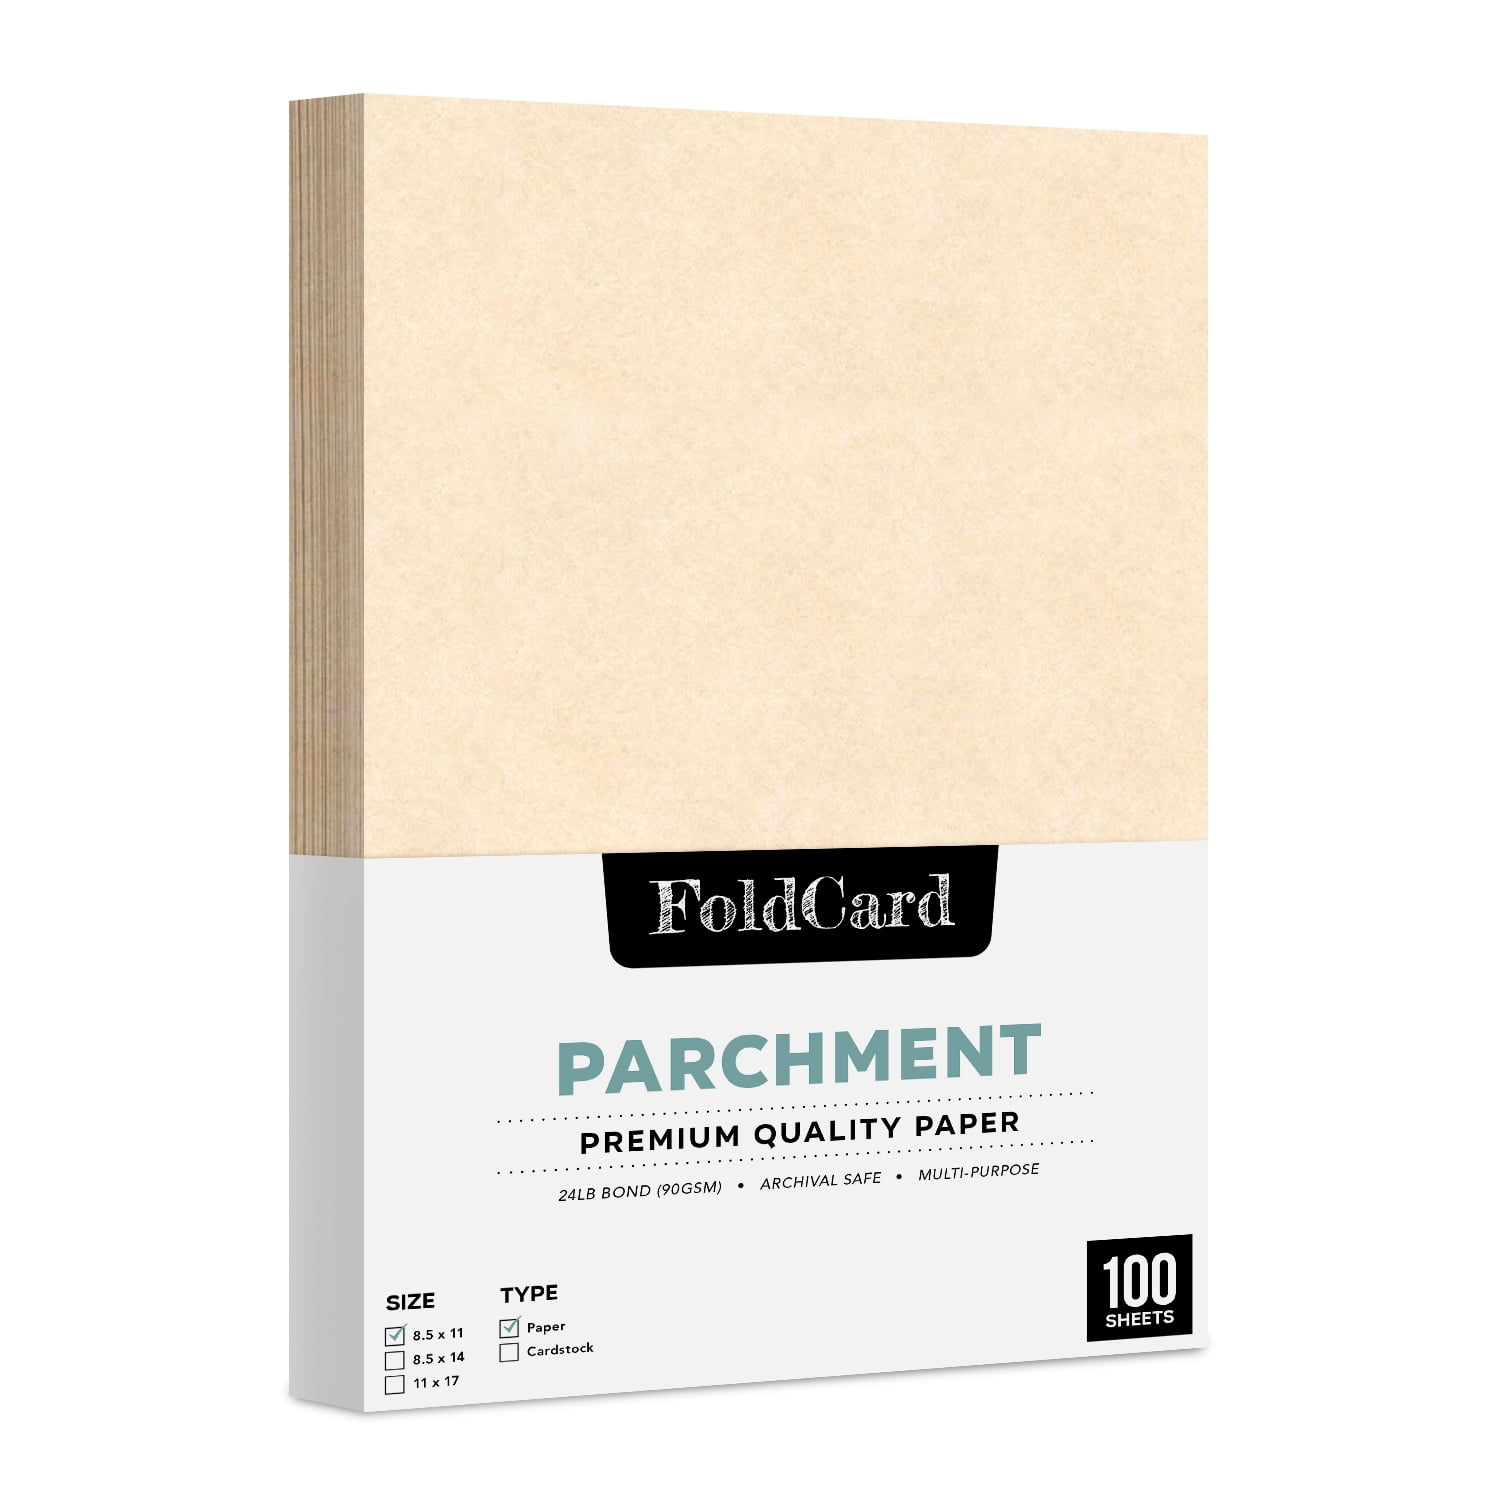 Aged-Look Parchment Stationery Paper for Writing and Printing- 8.5x11 -Bulk Pack of 100 Sheets